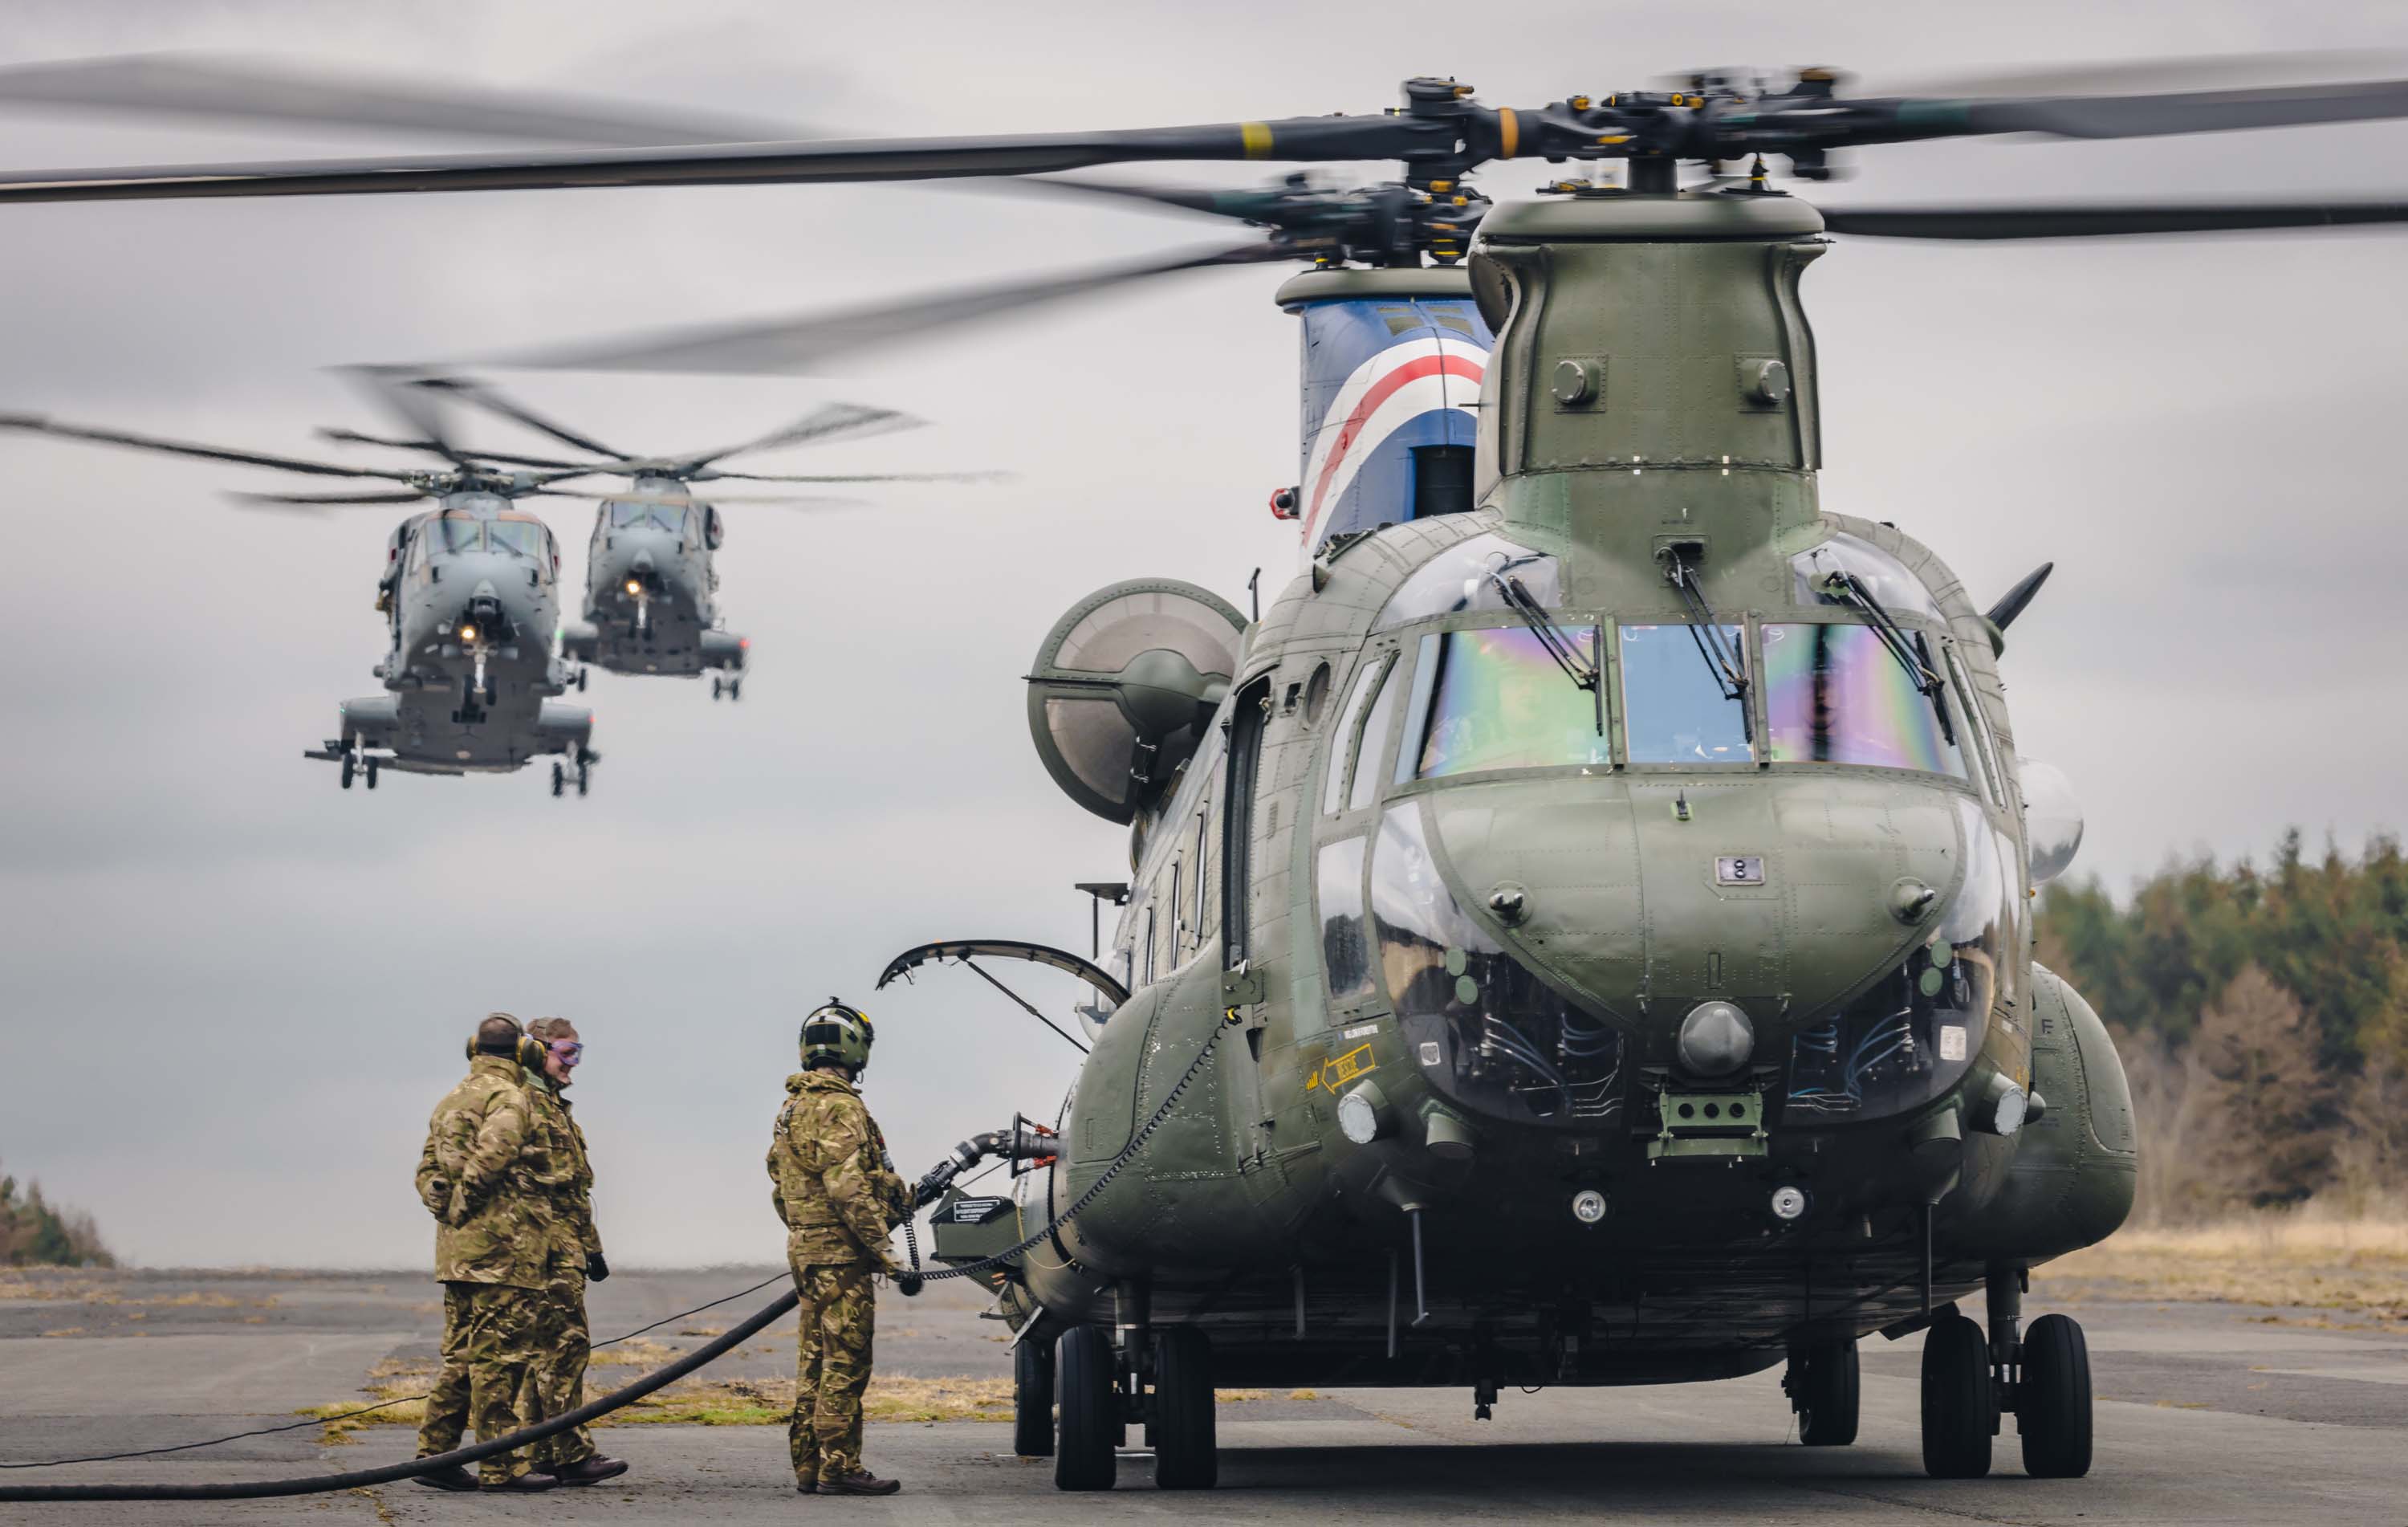 Image shows RAF aviators refuelling a helicopter on the airfield while two more come into land.